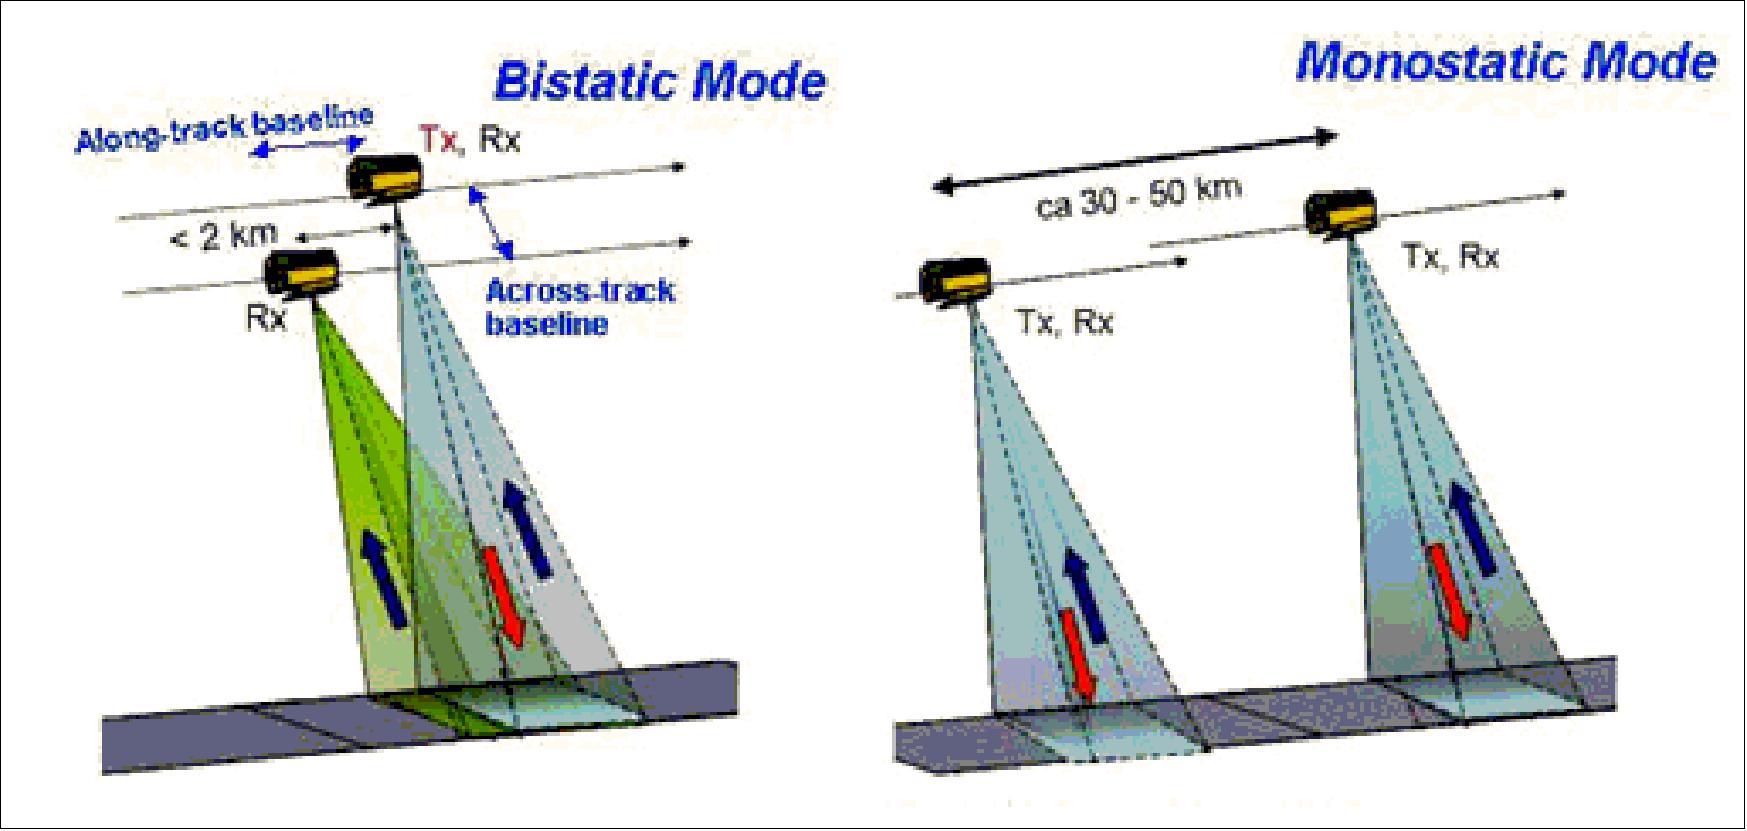 Figure 2: Concept of TanDEM-X InSAR observations in bistatic (left) and monostatic (right) modes (image credit: DLR)